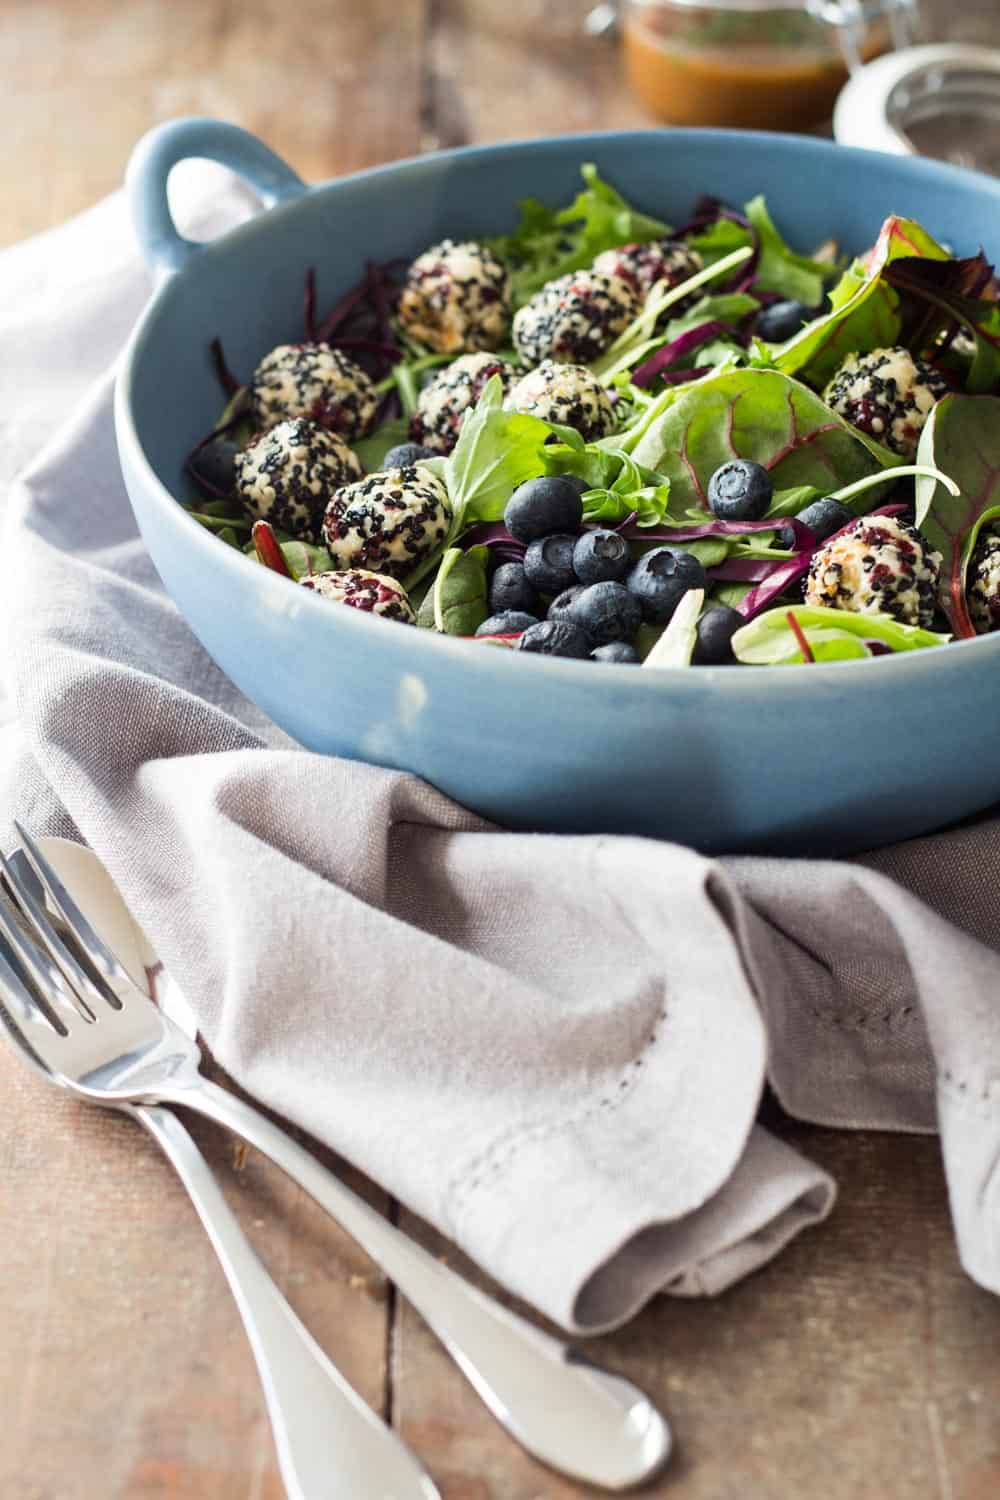 Warm Goat Cheese Salad in a blue salad bowl